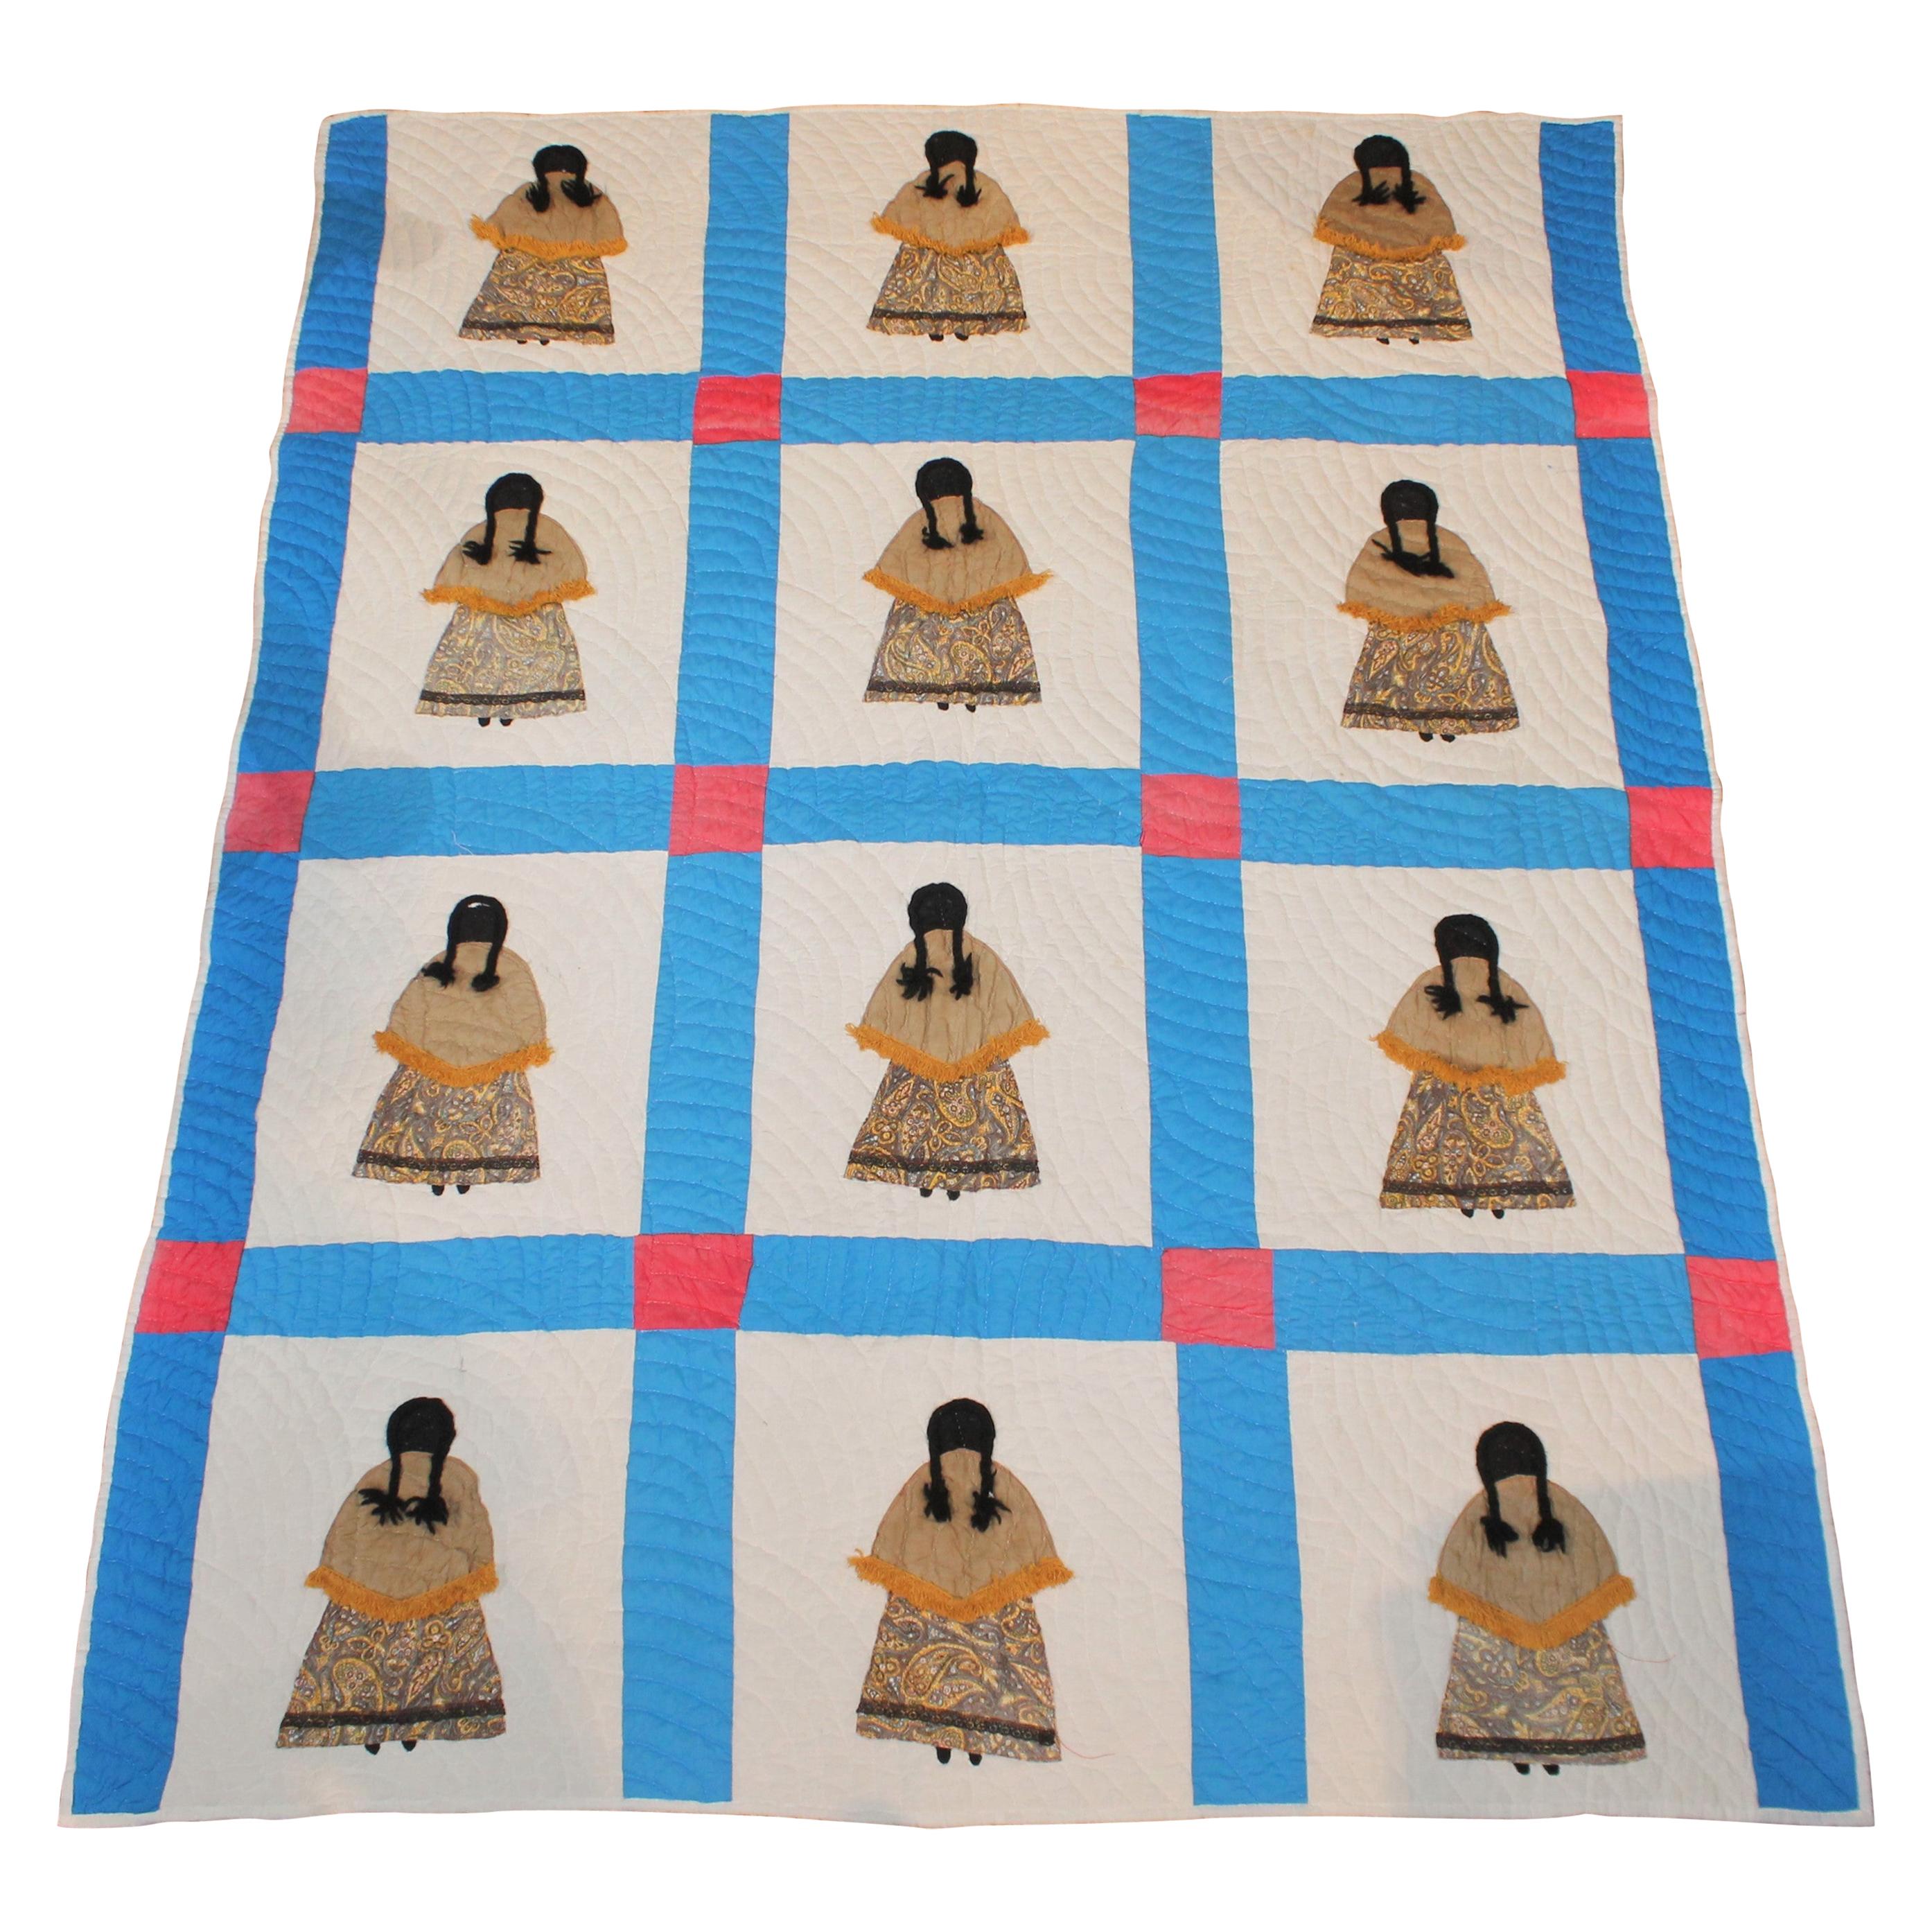 Rare Pictorial Indian Girl Applique Quilt from Oklahoma